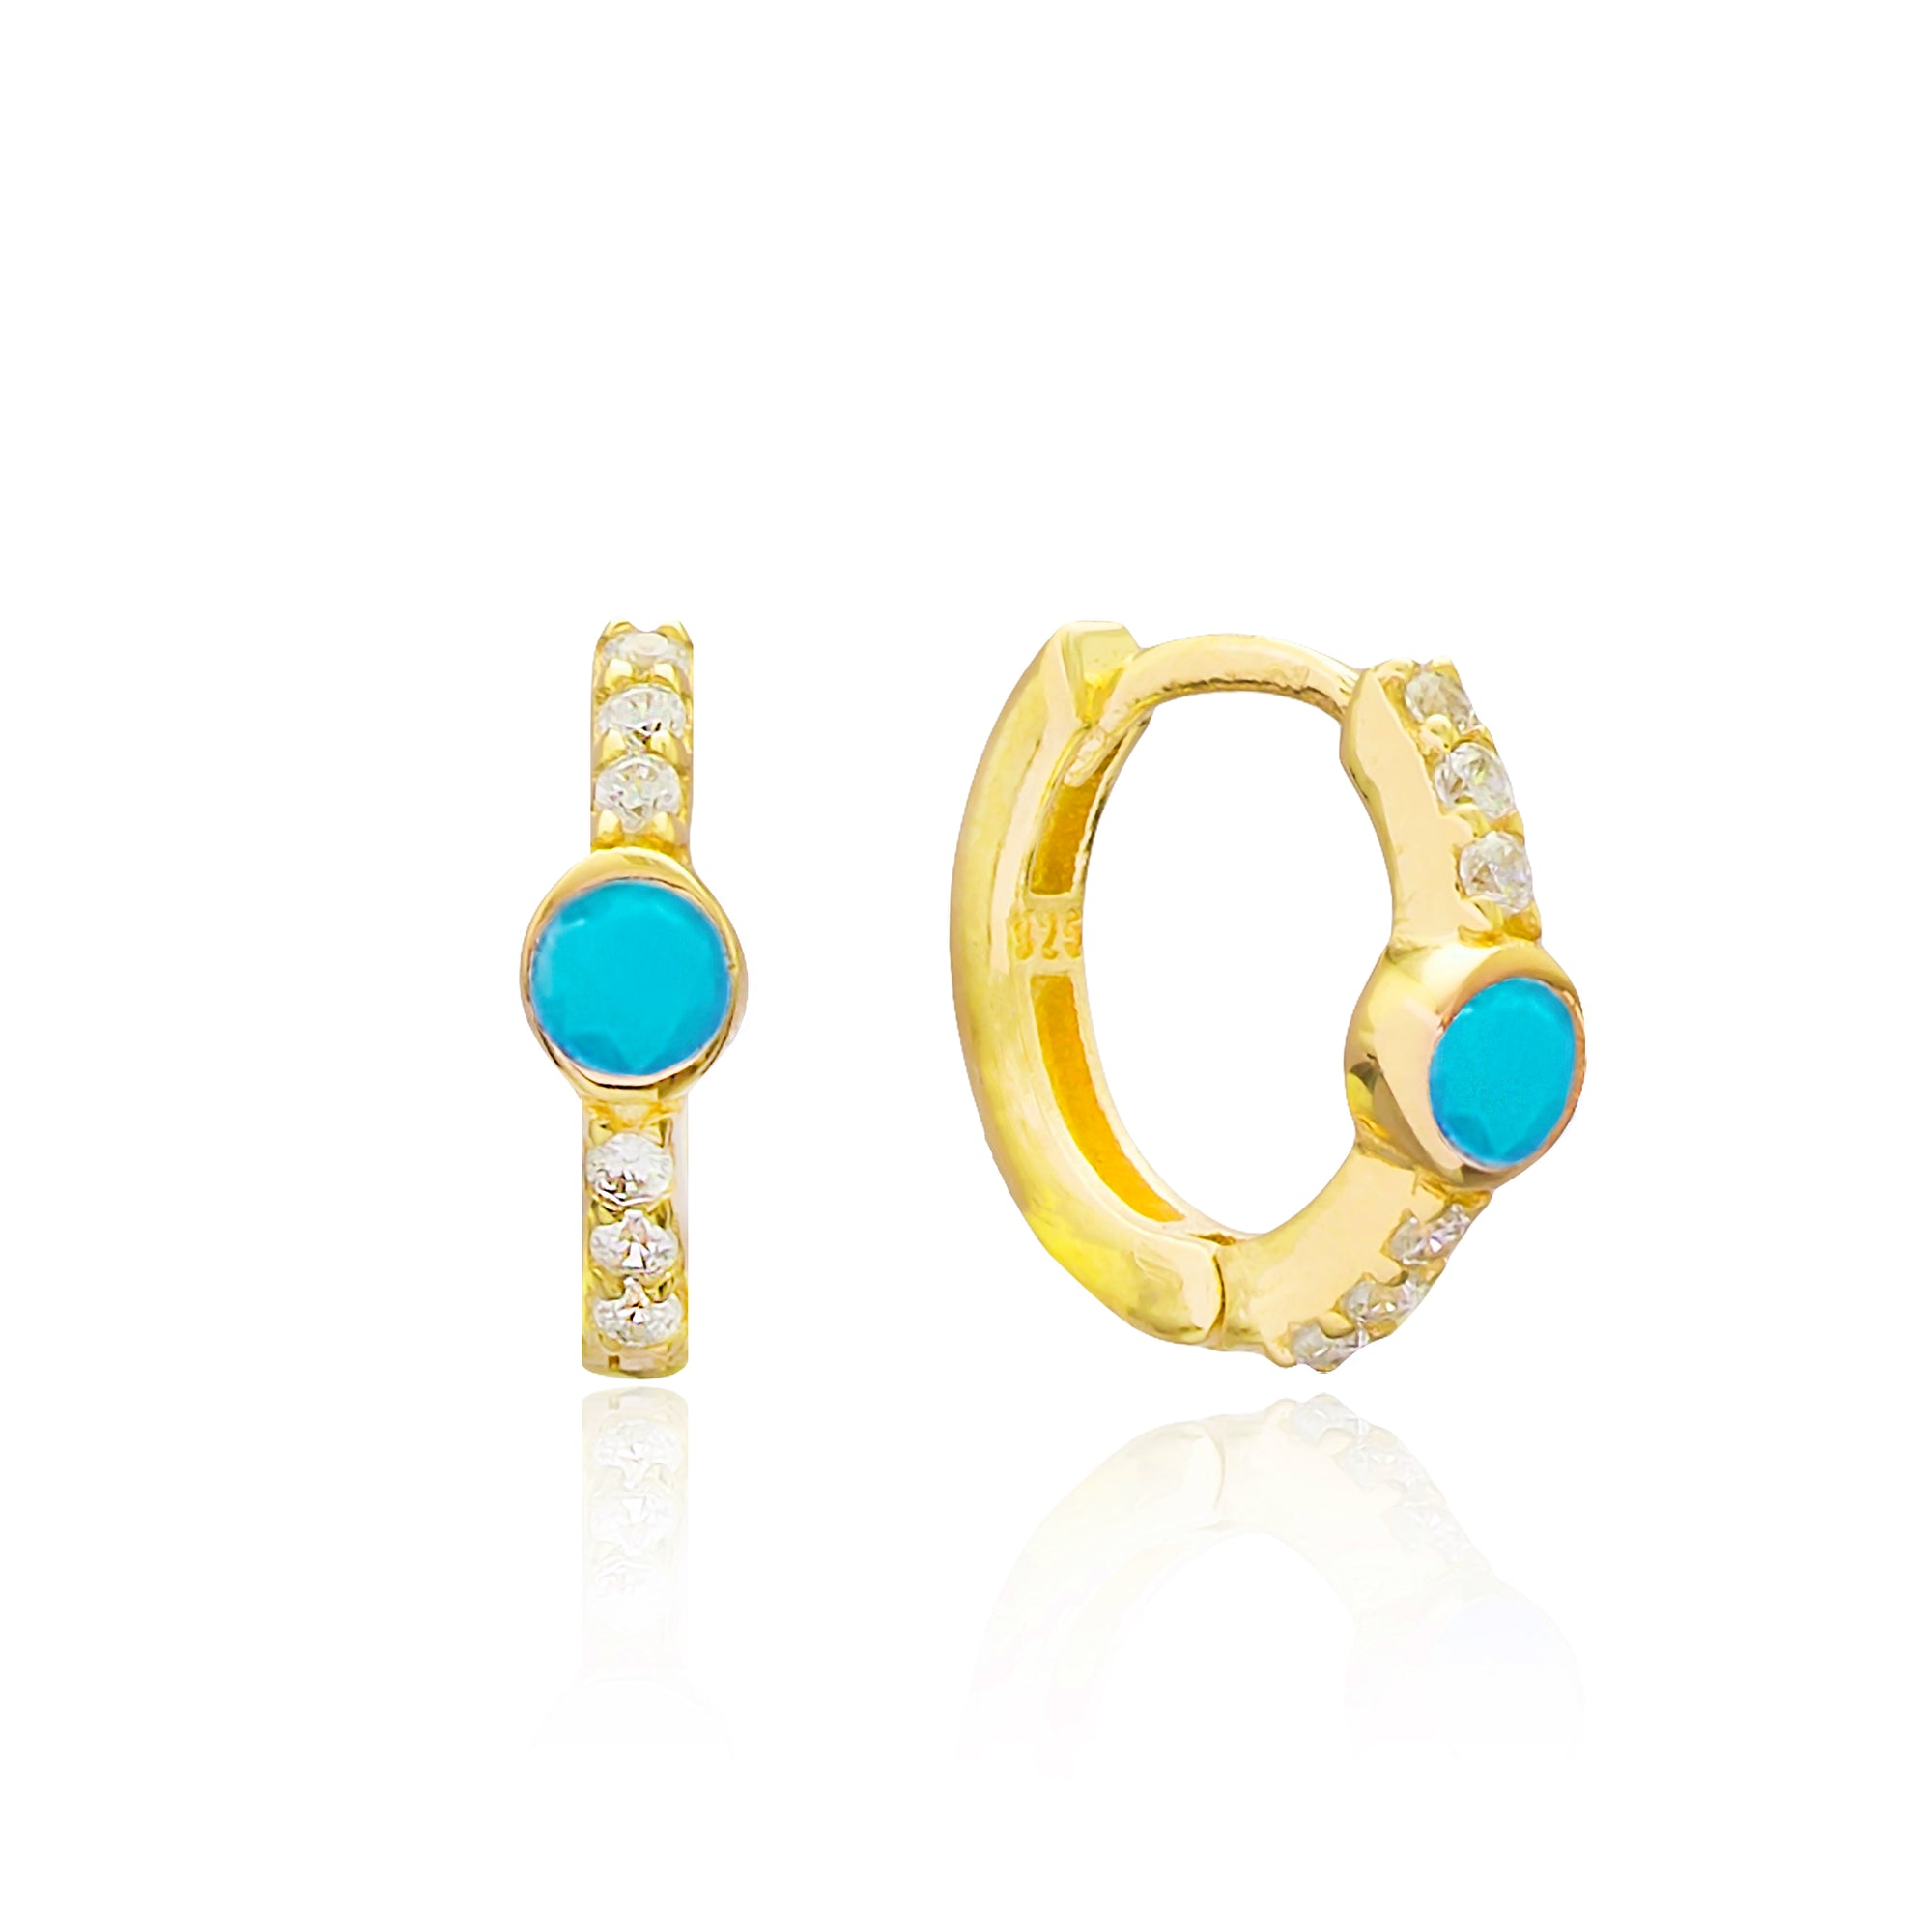 BELLA HOOP EARRINGS - Sarah Stretton Our sterling silver huge earrings exude subtle class.  With a range of stunning designs creating your curated ear is easy. Add pop of turquoise with BELLA hoops